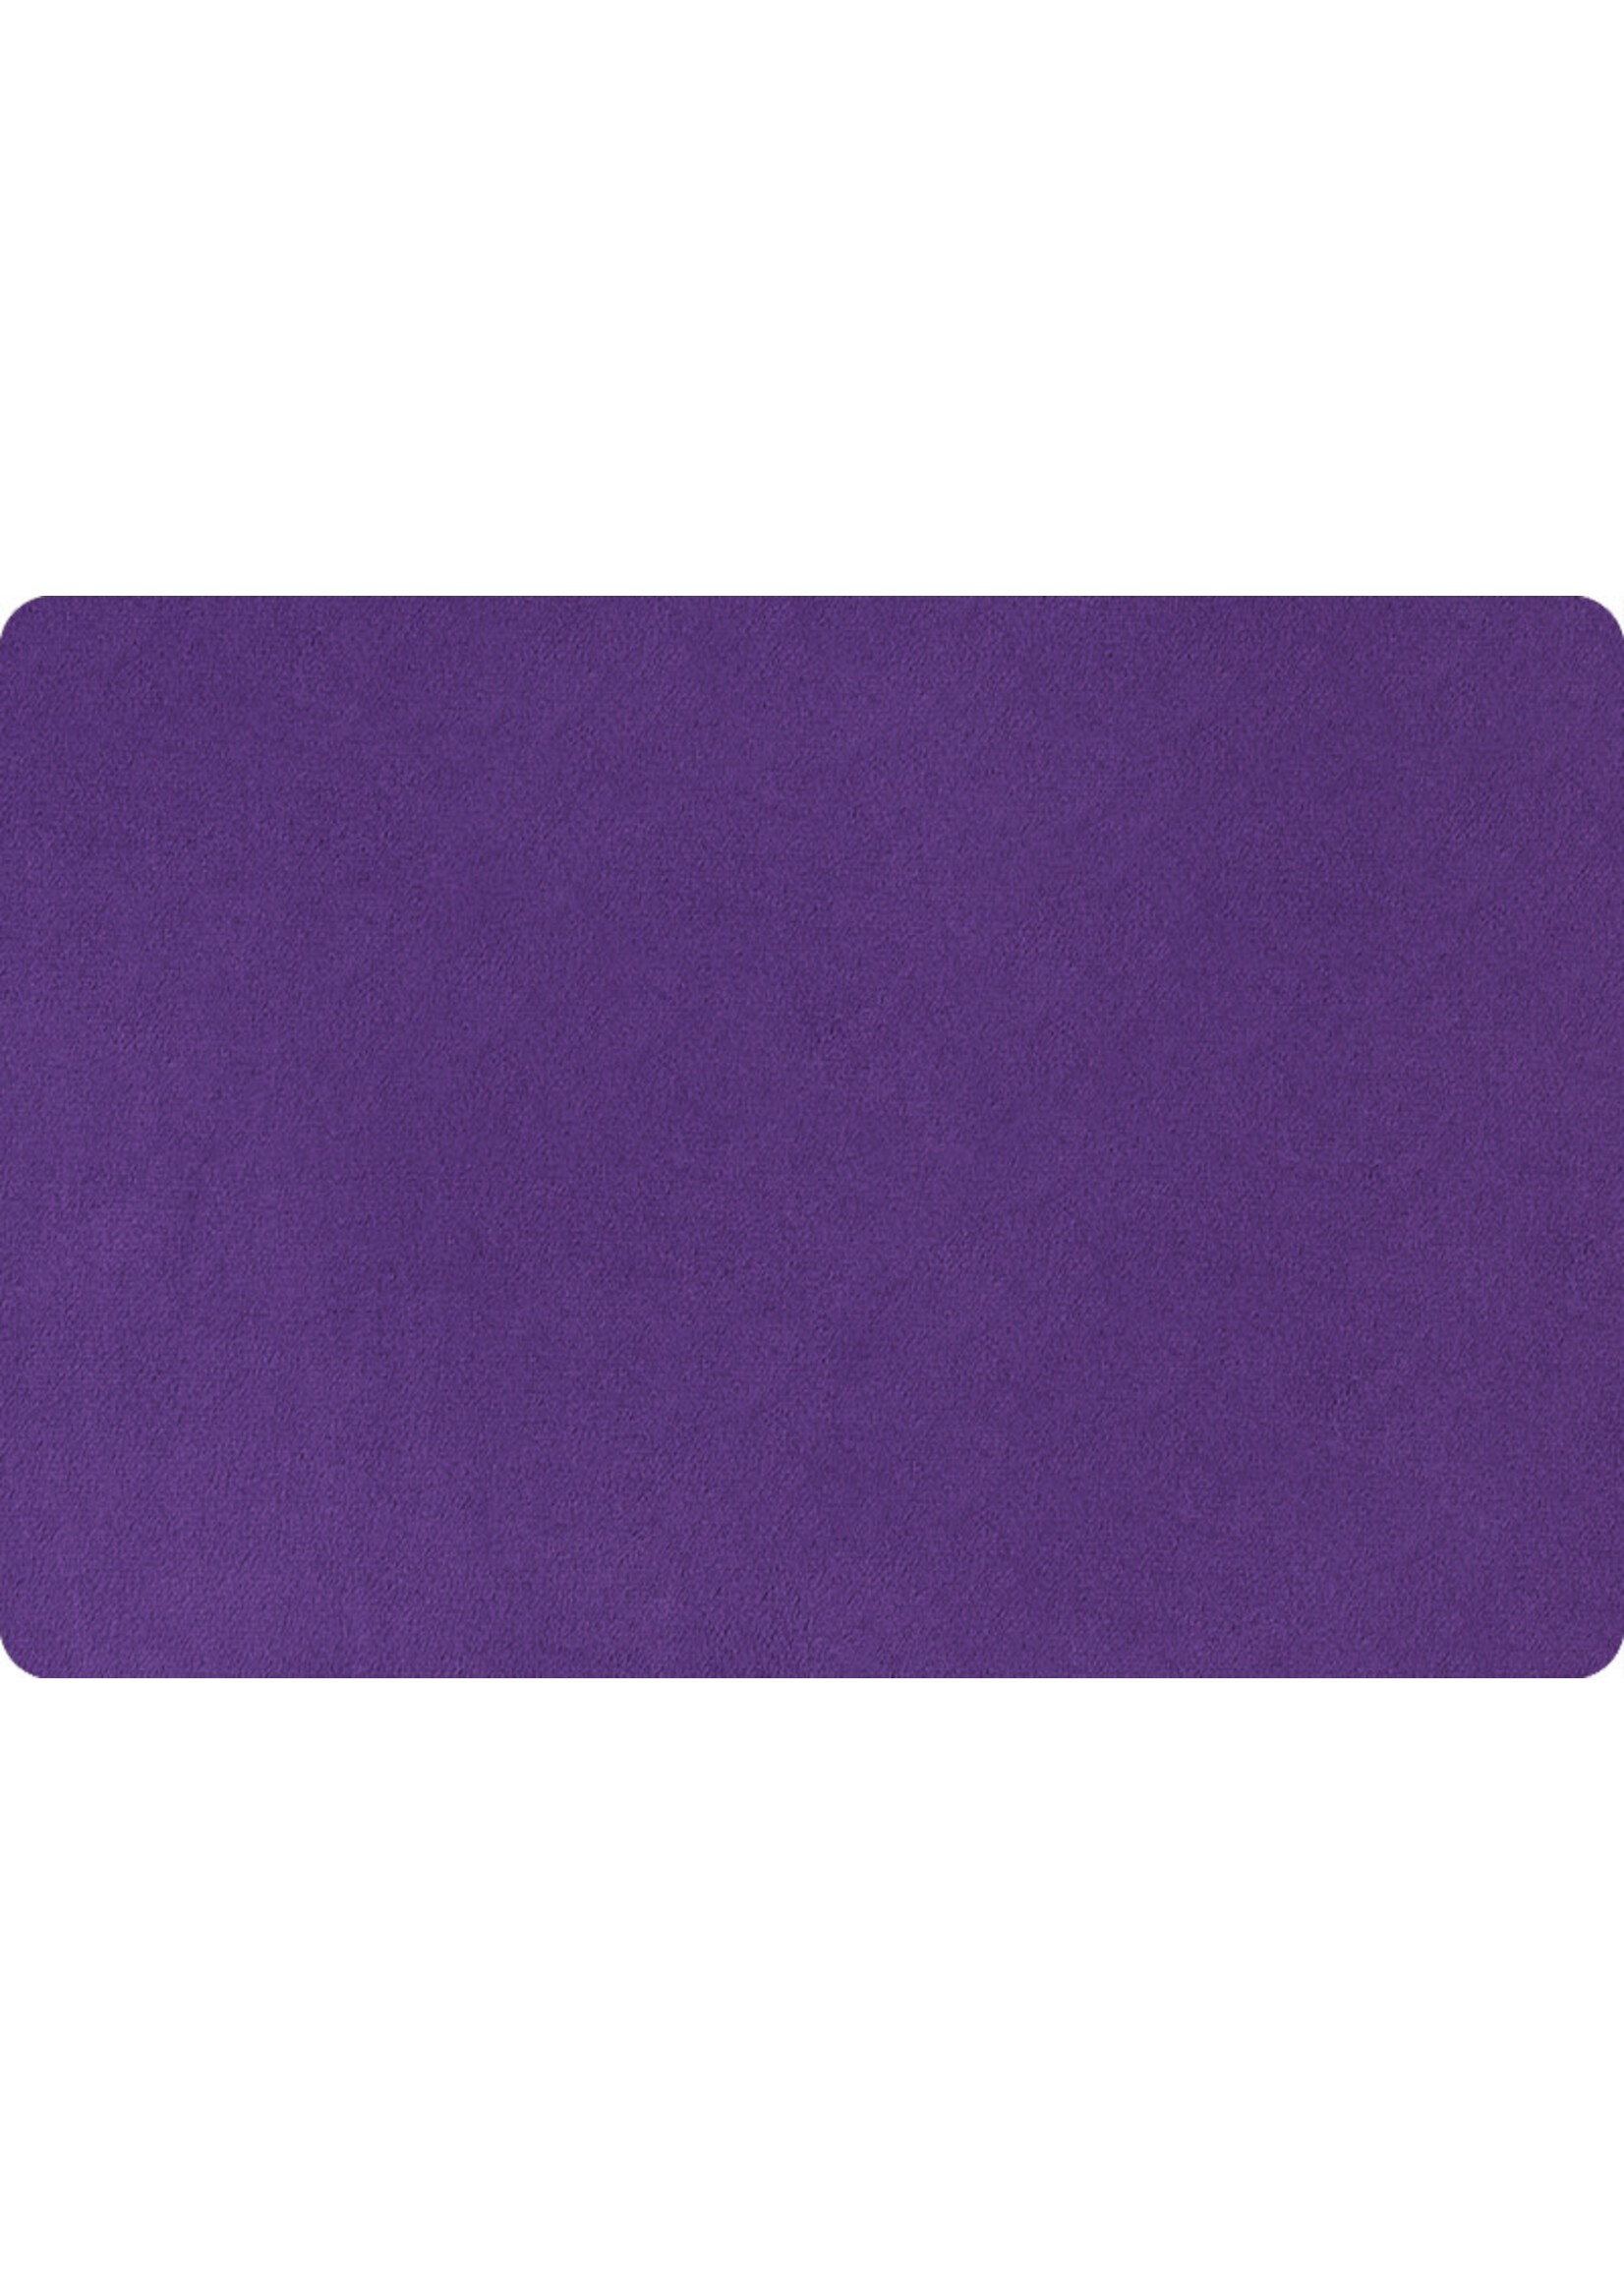 Shannon Fabrics Minky, Extra Wide Solid Cuddle3, 90" Amethyst, (by the inch)